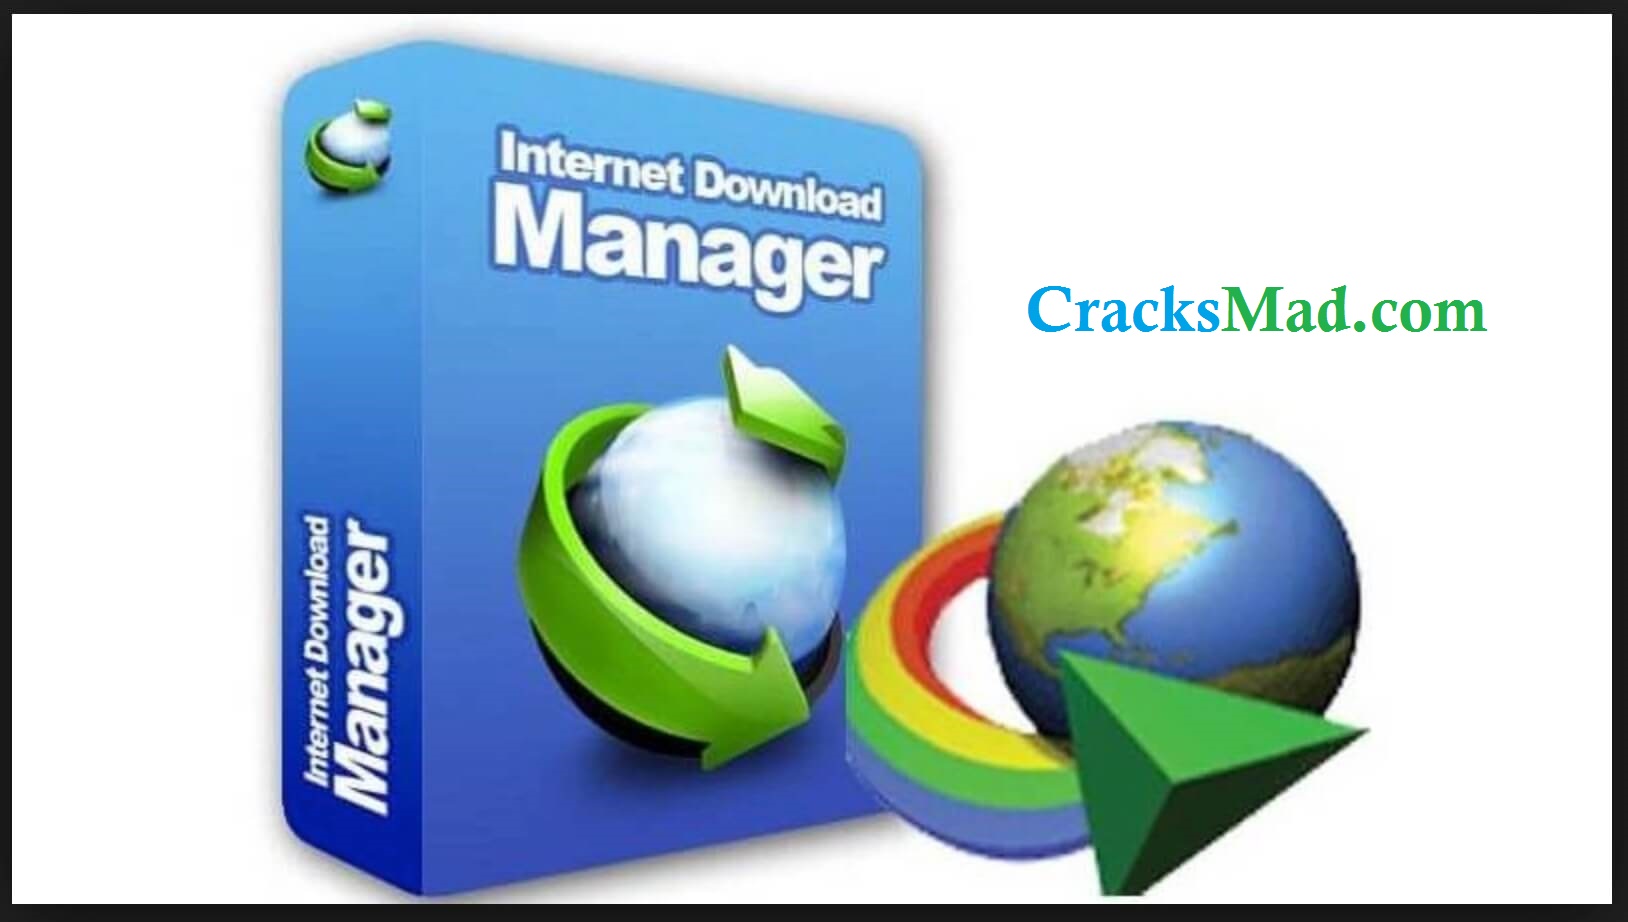 download idm crack 6.39 build 2 patch serial key free